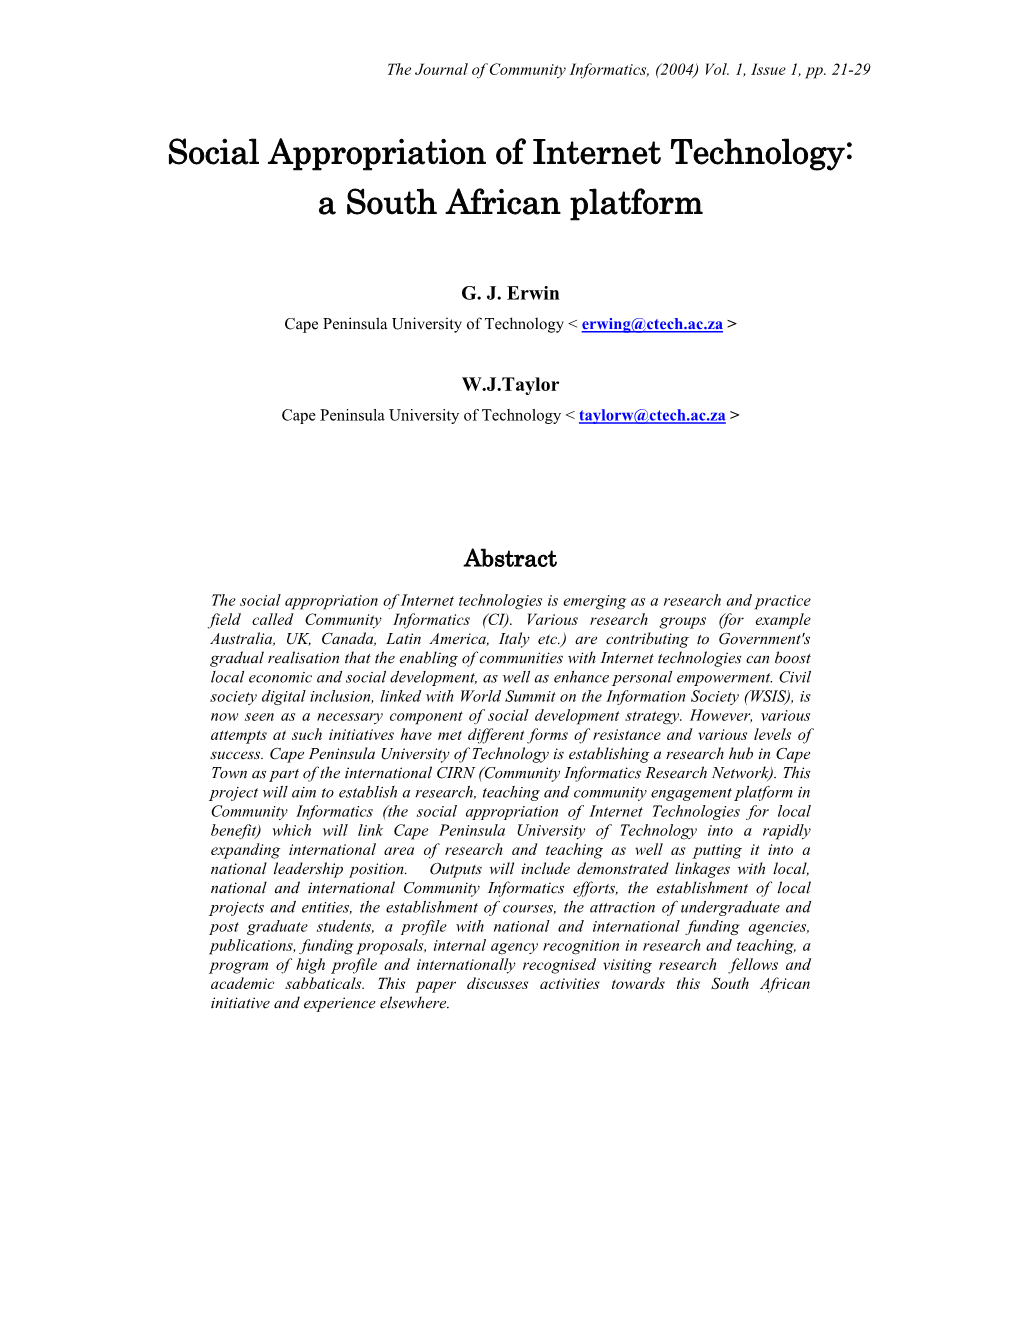 Social Appropriation of Internet Technology: a South African Platform